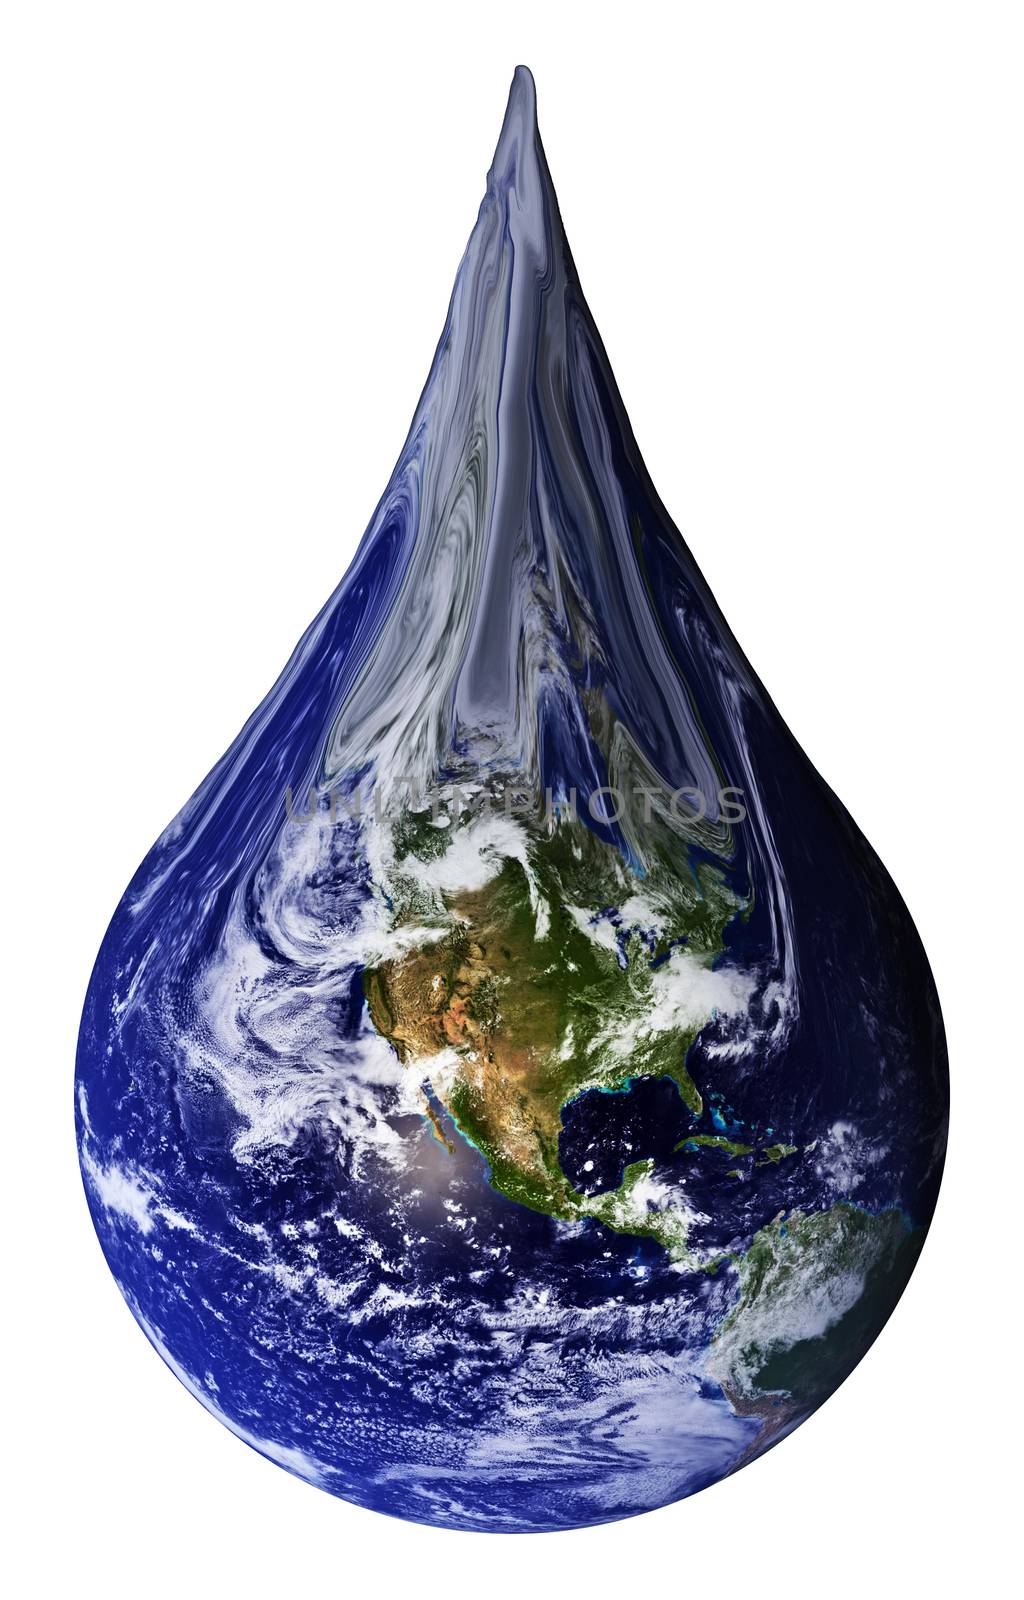 The Earth shaped as a teardrop. From a NASA image